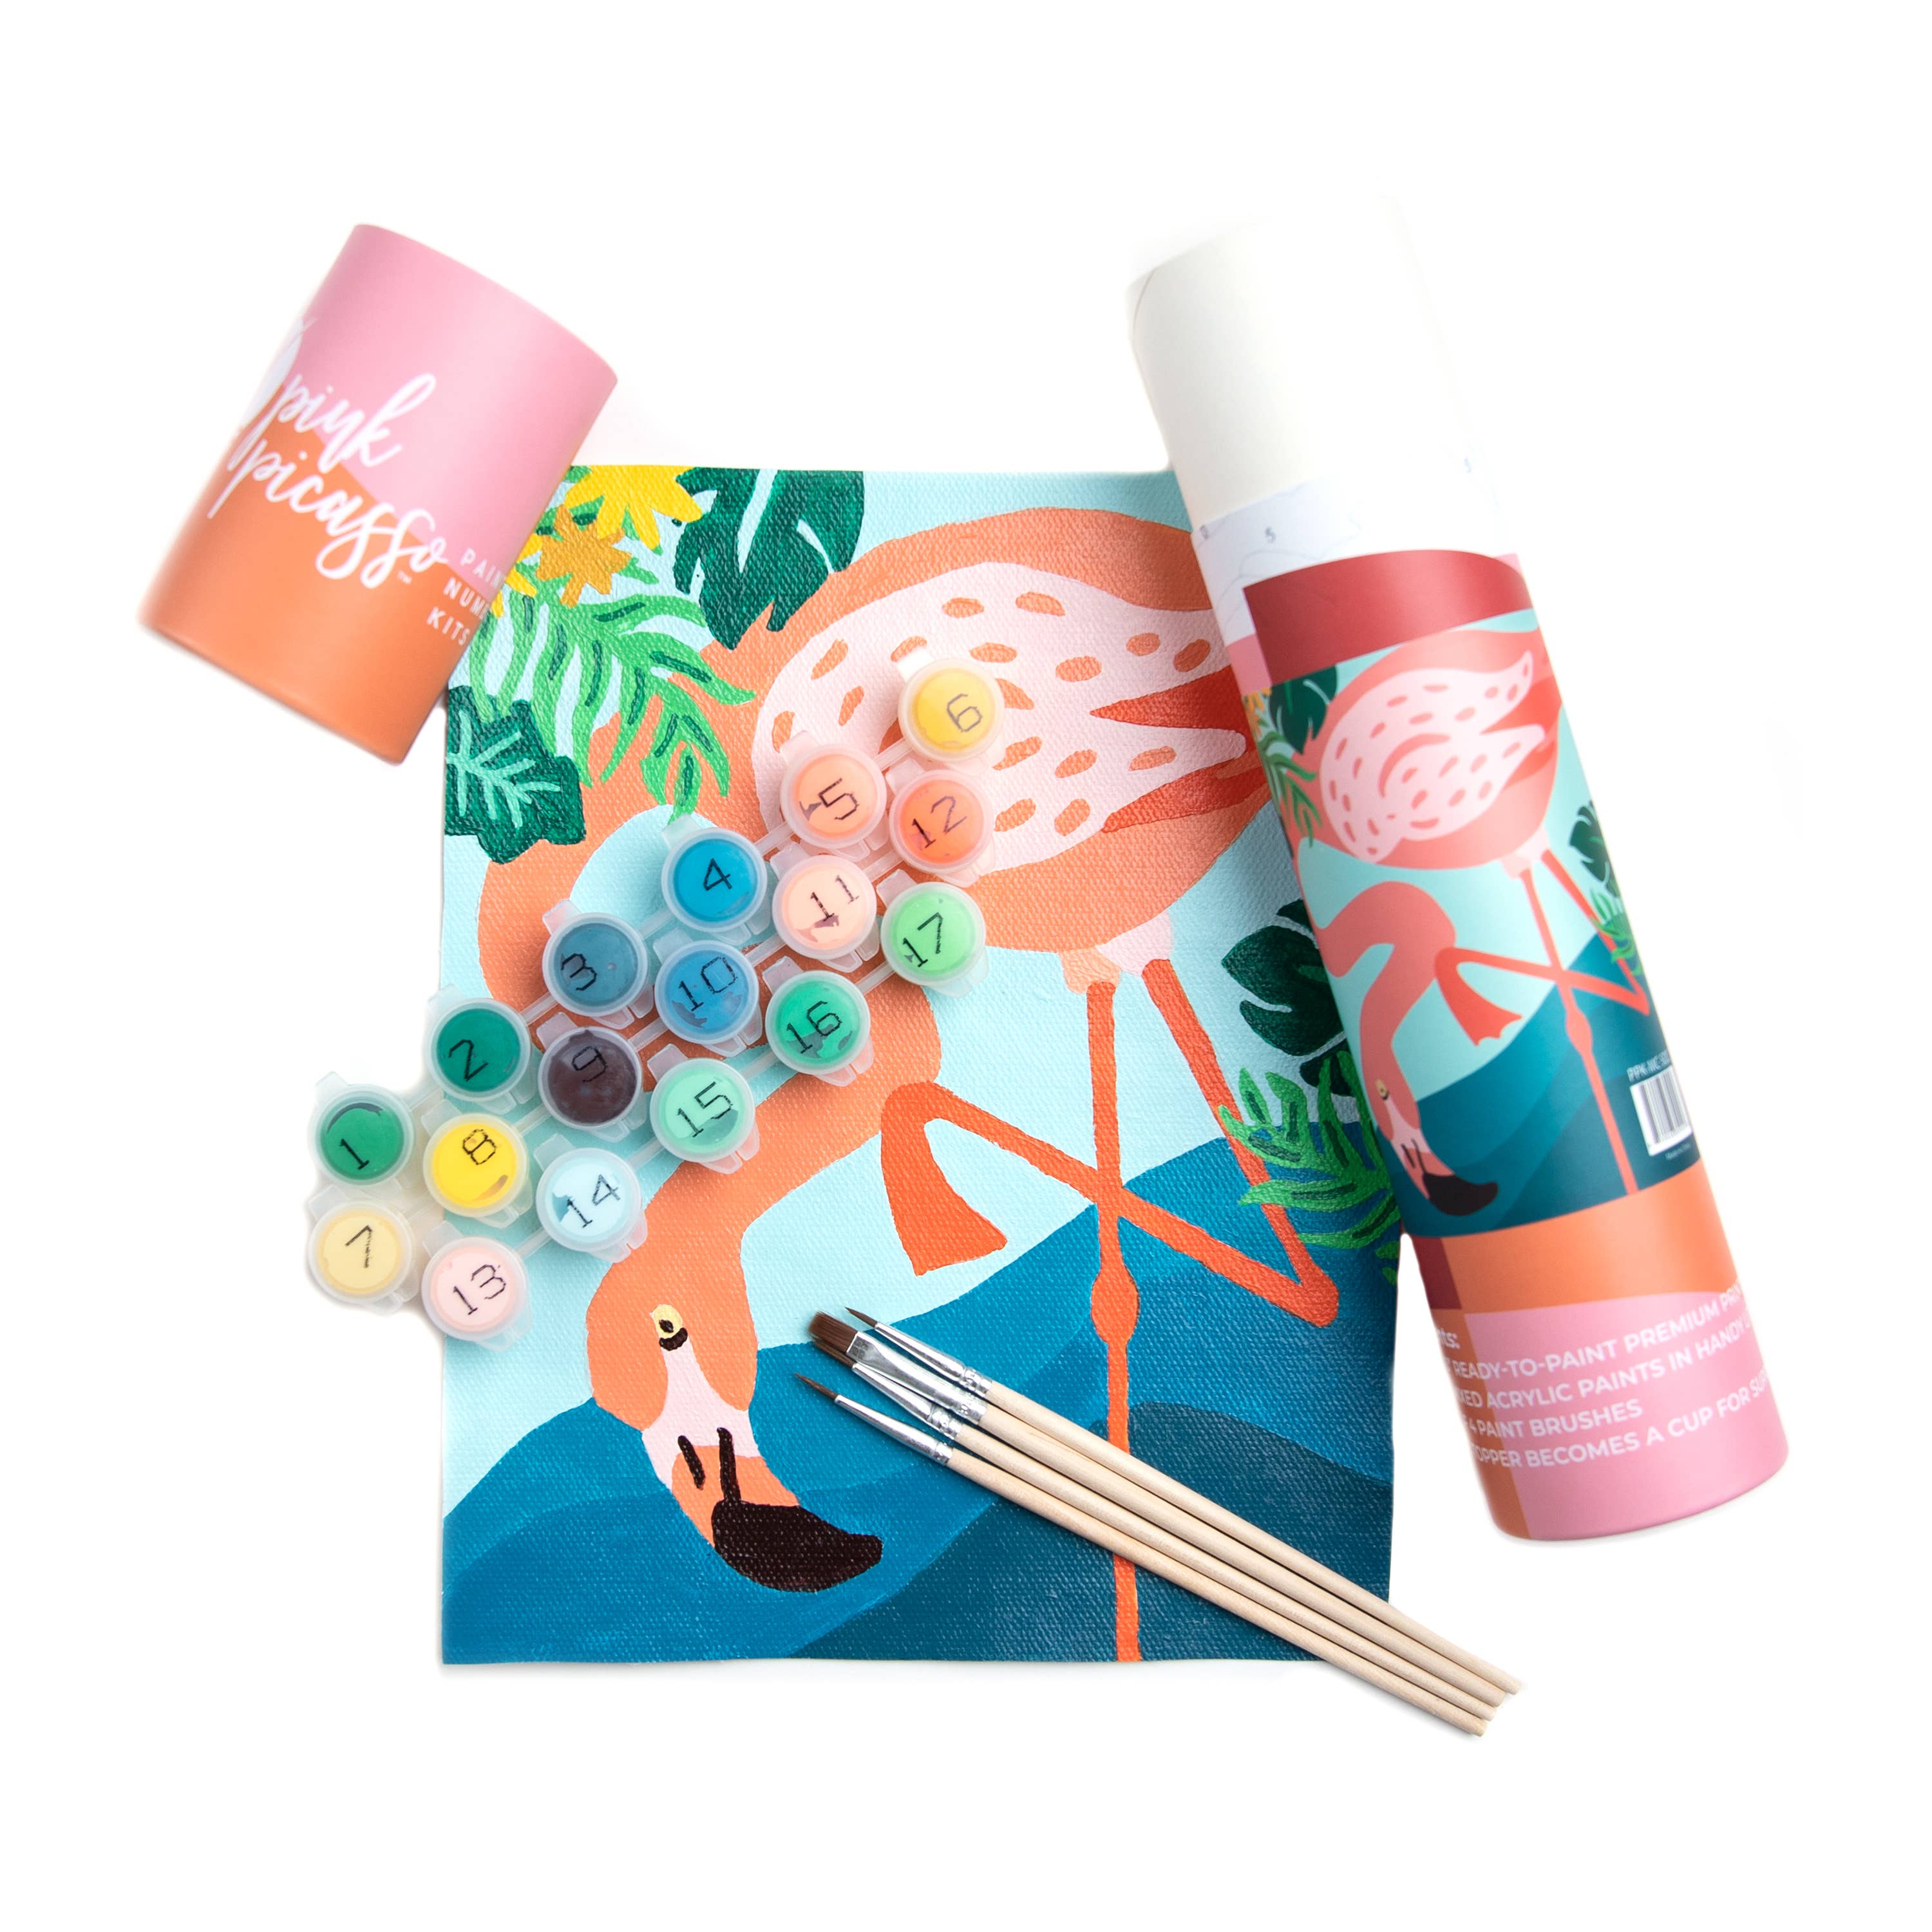 All About Austin Pink Picasso Paint by Numbers Kit